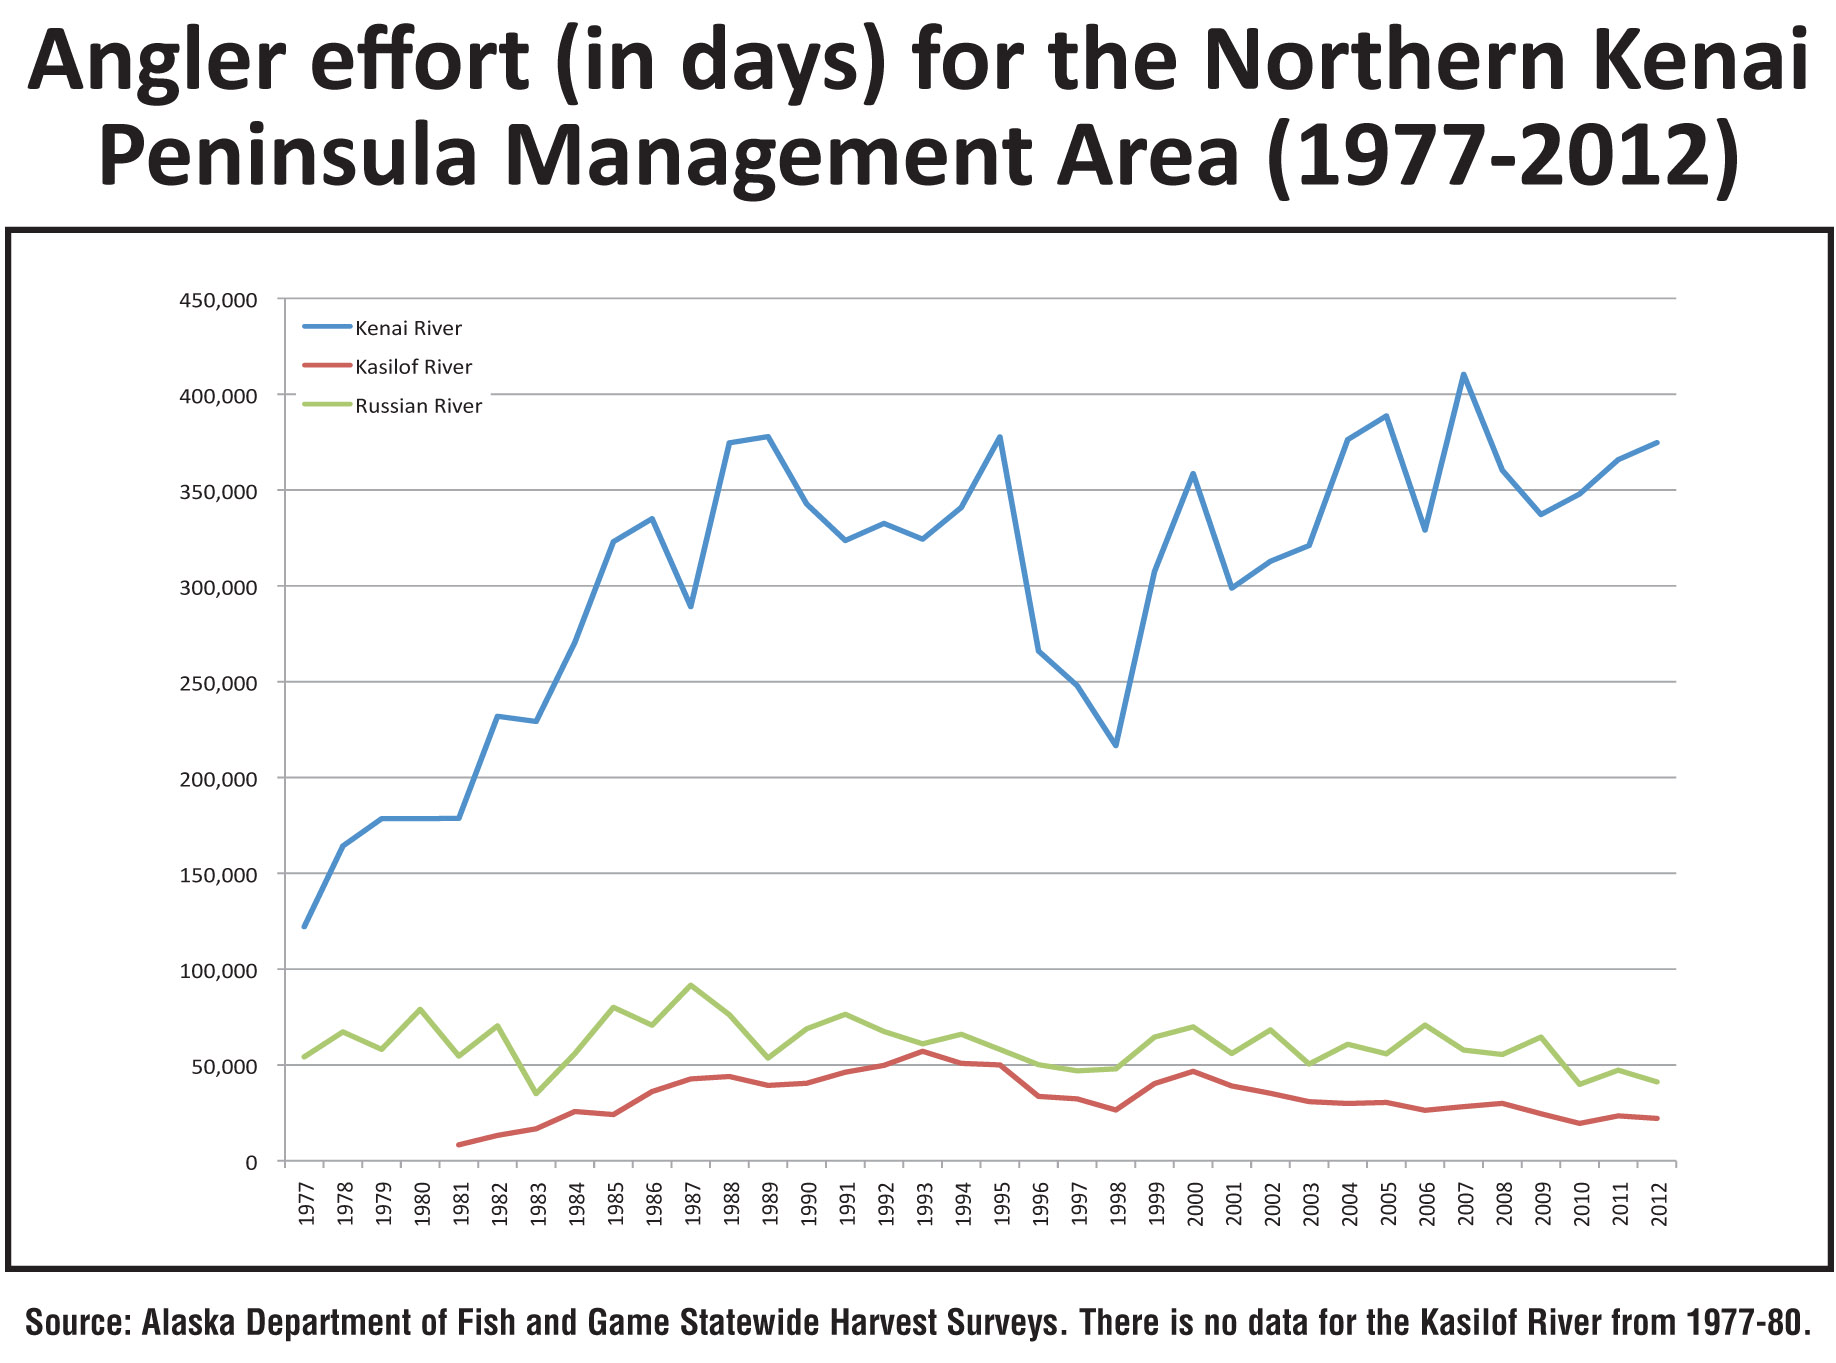 Since the early 1980s, angler effort in Alaska has gravitated toward the Kenai River while declining on the Kasilof and Russian rivers. From 62 percent of angler effort in 1982, the Kenai River amounted to 82 percent of all angler days spent in the Northern Kenai Peninsula Management Area during 2012.